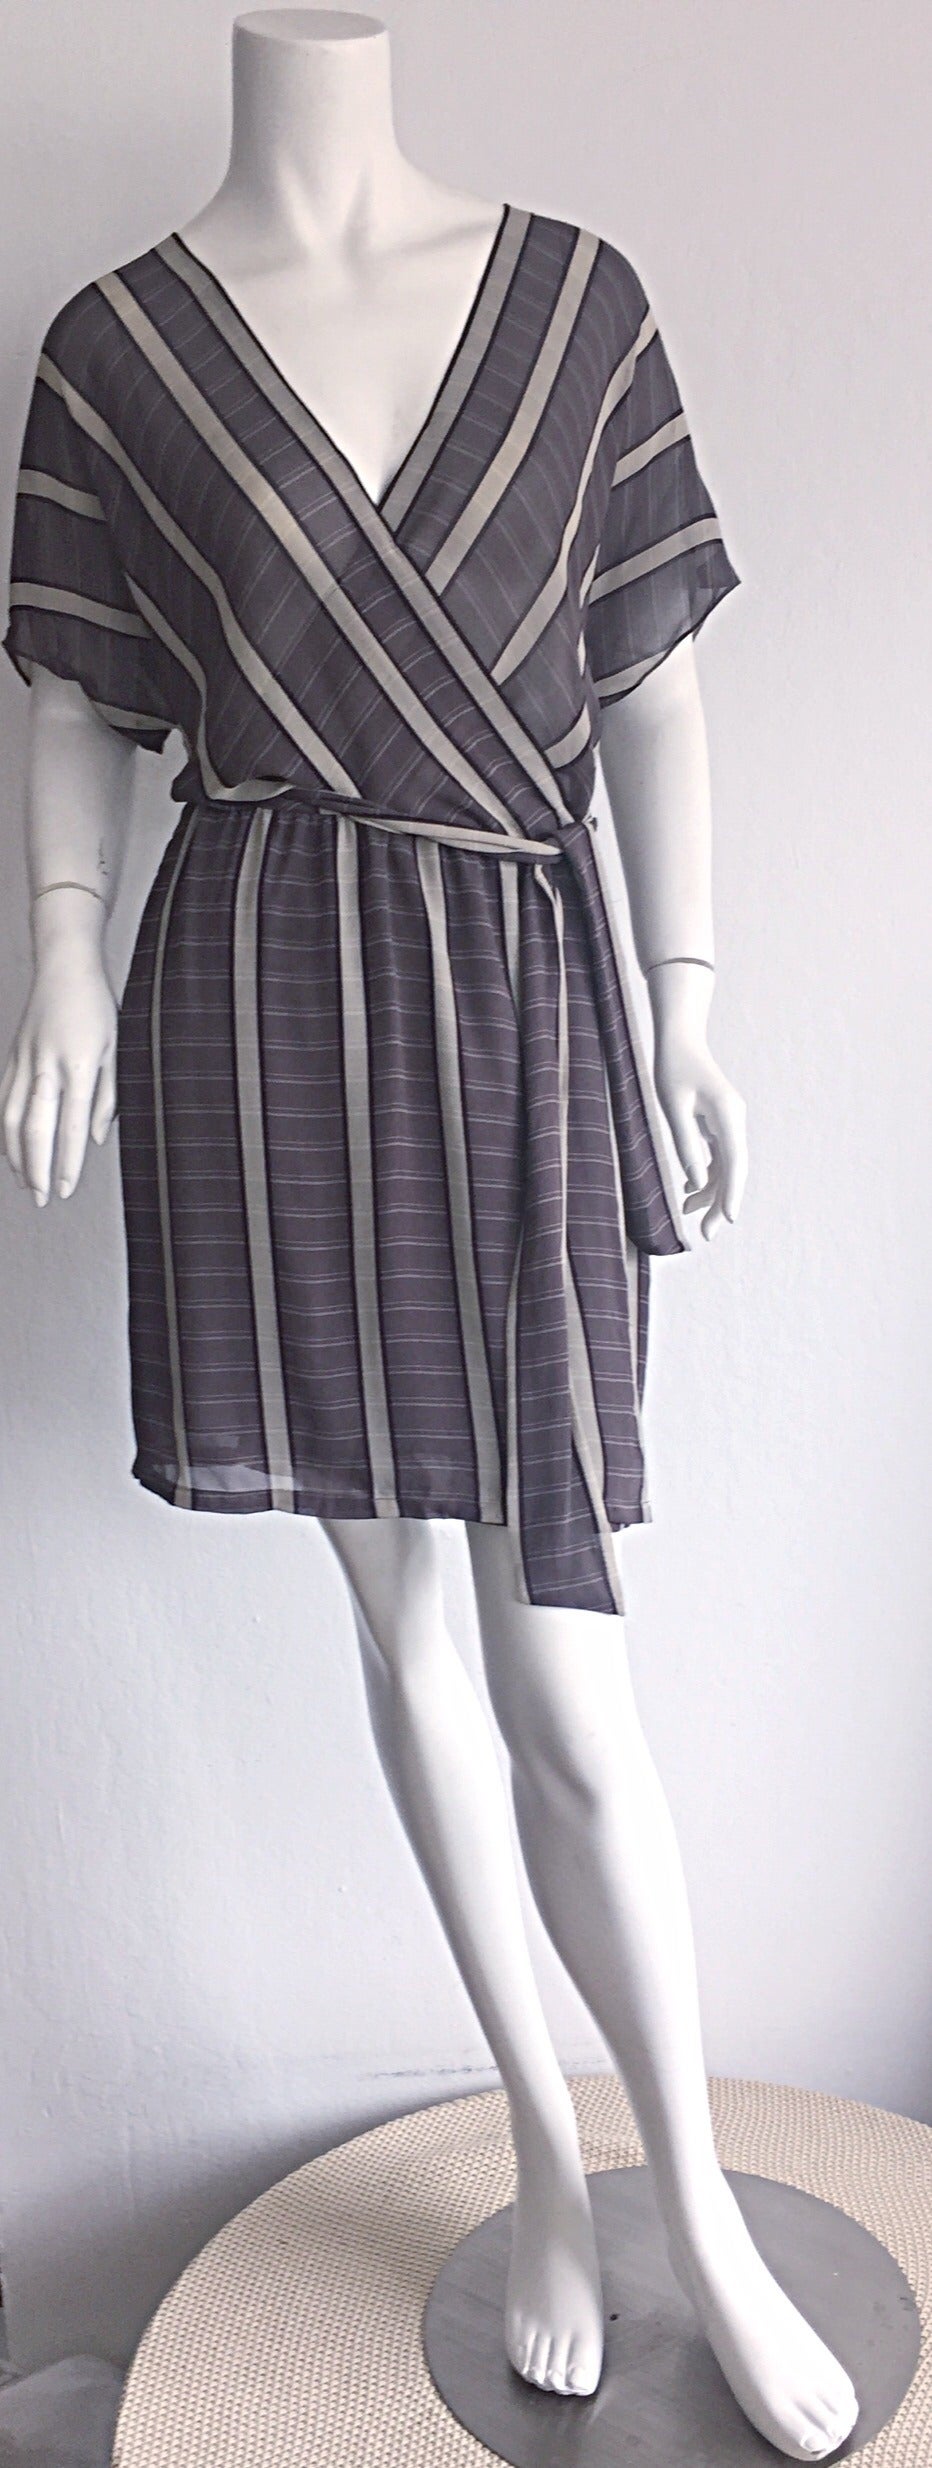 Wonderful vintage 1990s Calvin Klein Collection 'bamboo' striped silk wrap dress! Warm tones of grey, black, and taupe, with contrasting stripes throughout create an ultra slimming effect! Great slouchy fit, with an attached wrap belt to cinch in